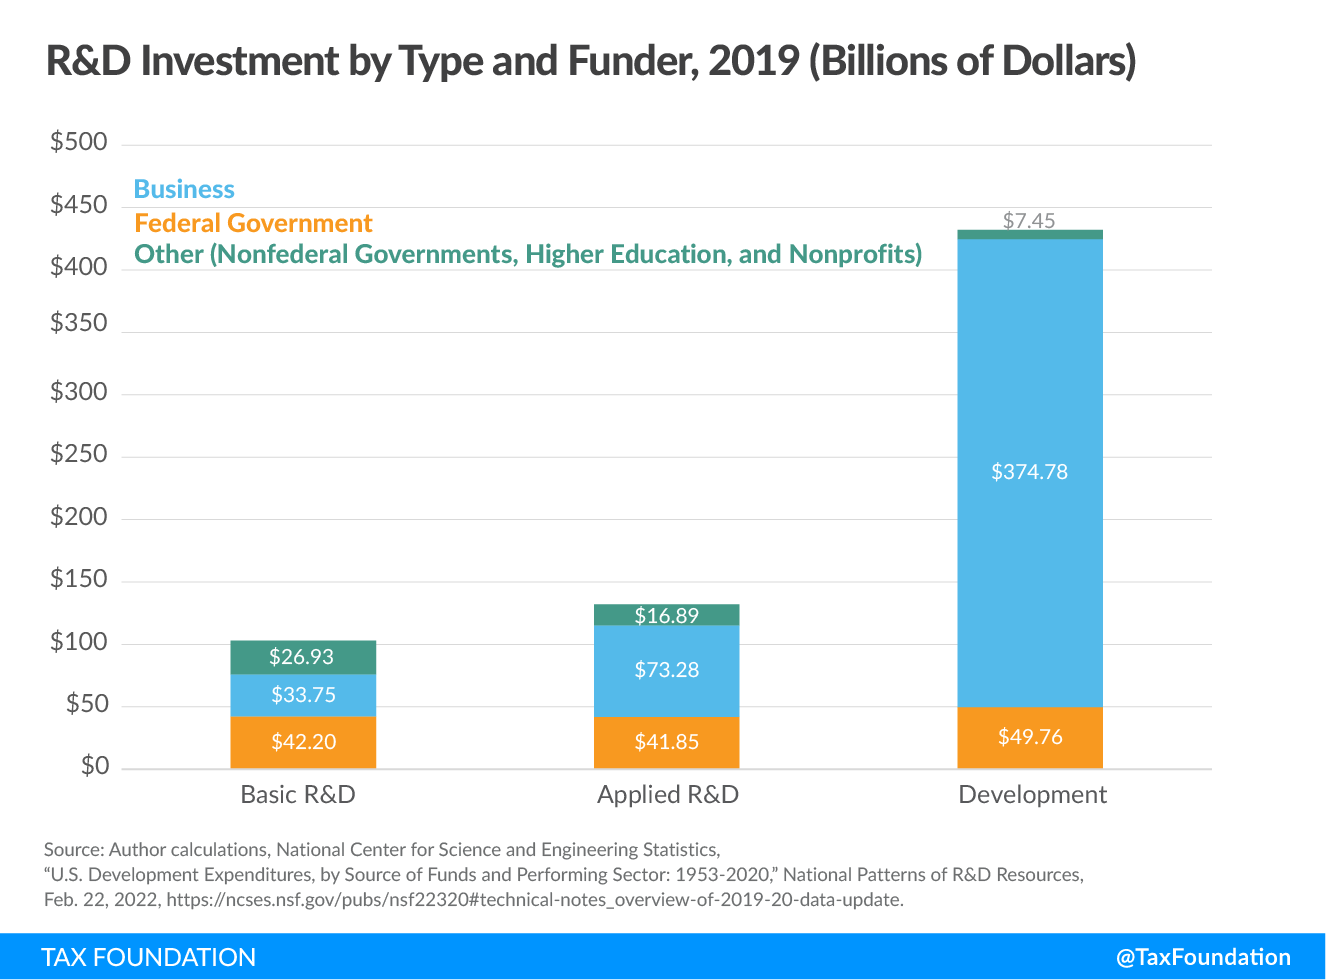 Public research and development and private research and development by type and funding private R&D and public R&D investment